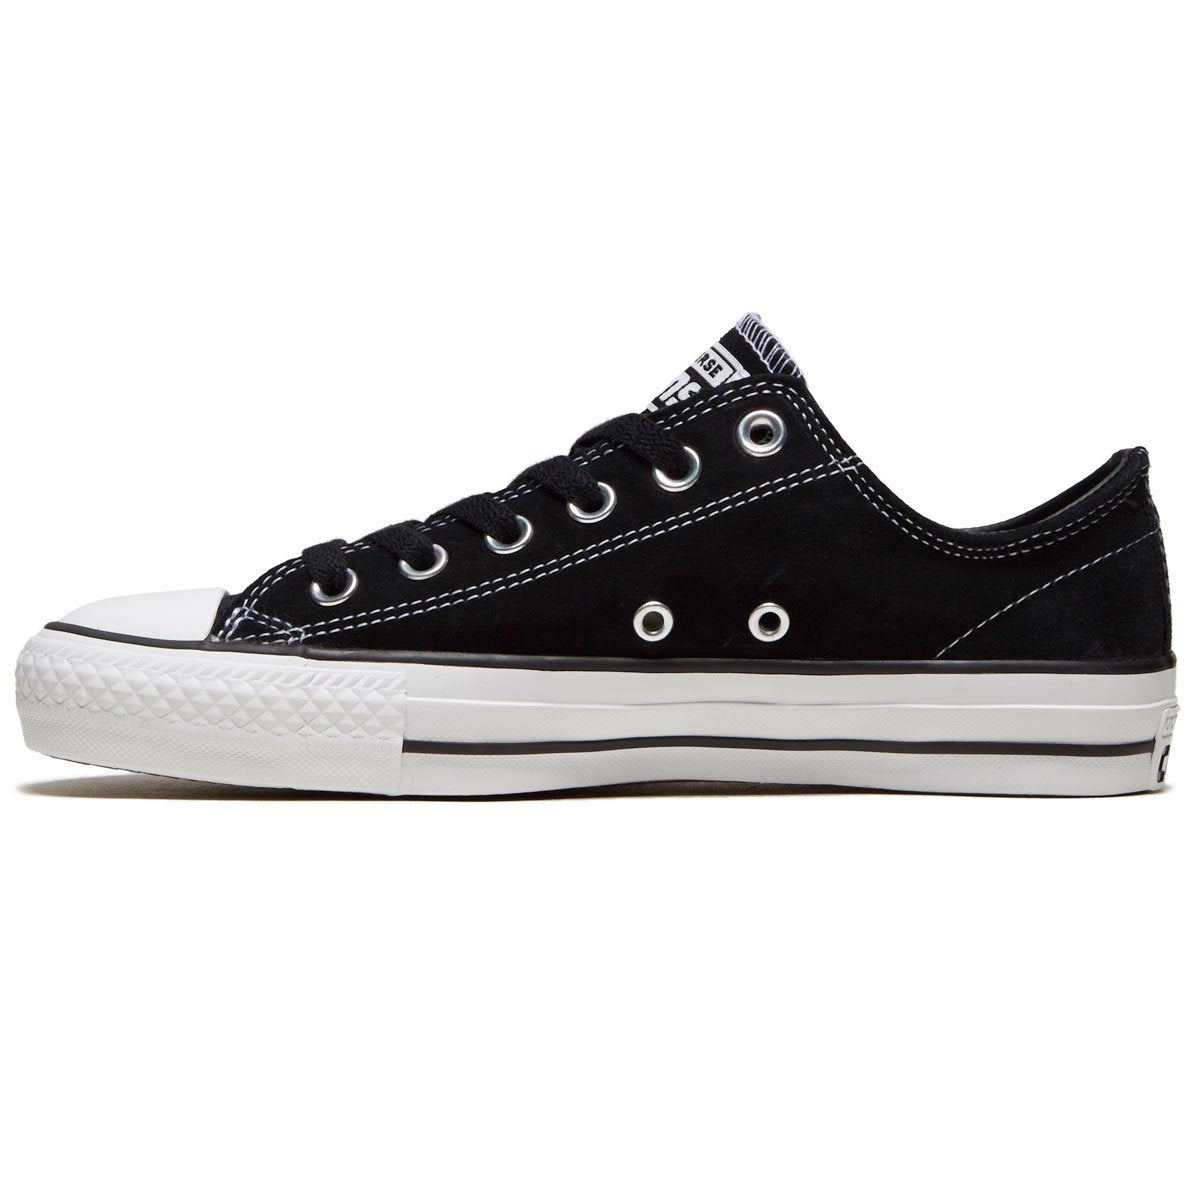 Converse Chuck Taylor All Pro Suede Ox Shoes Black/Black/White – Board